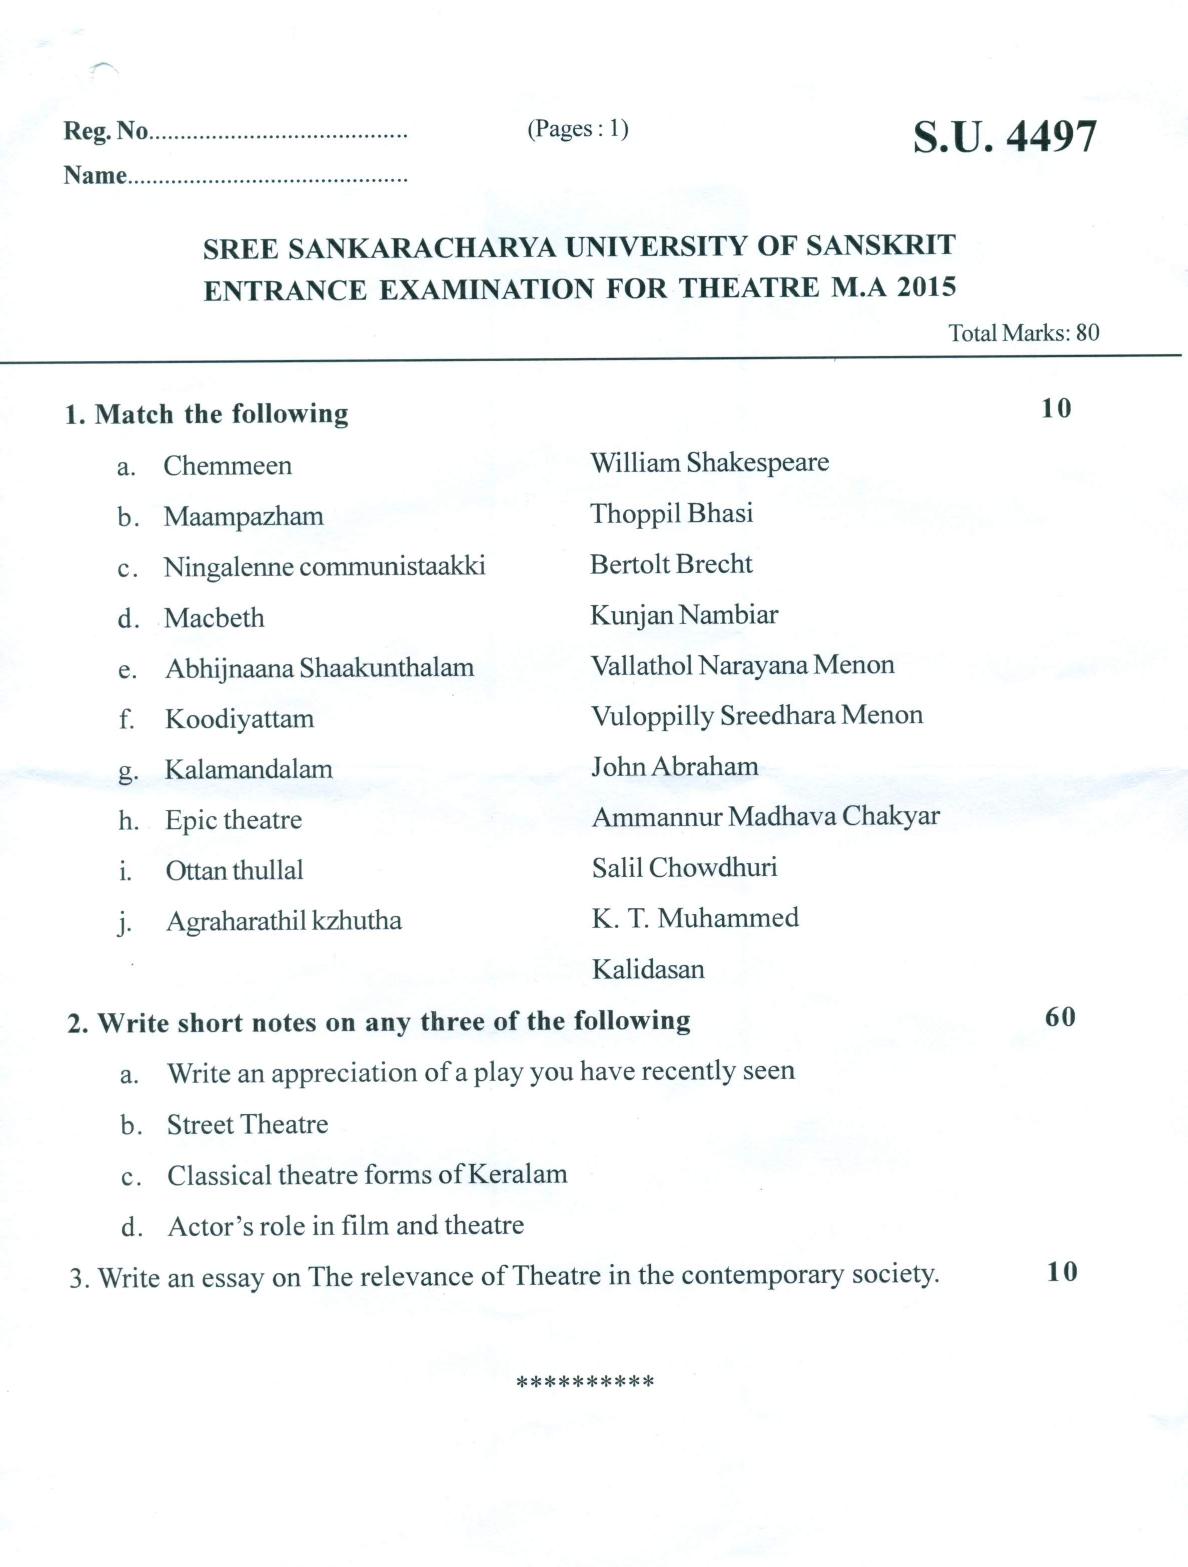 SSUS Entrance Exam THEATRE 2015 Question Paper - Page 1